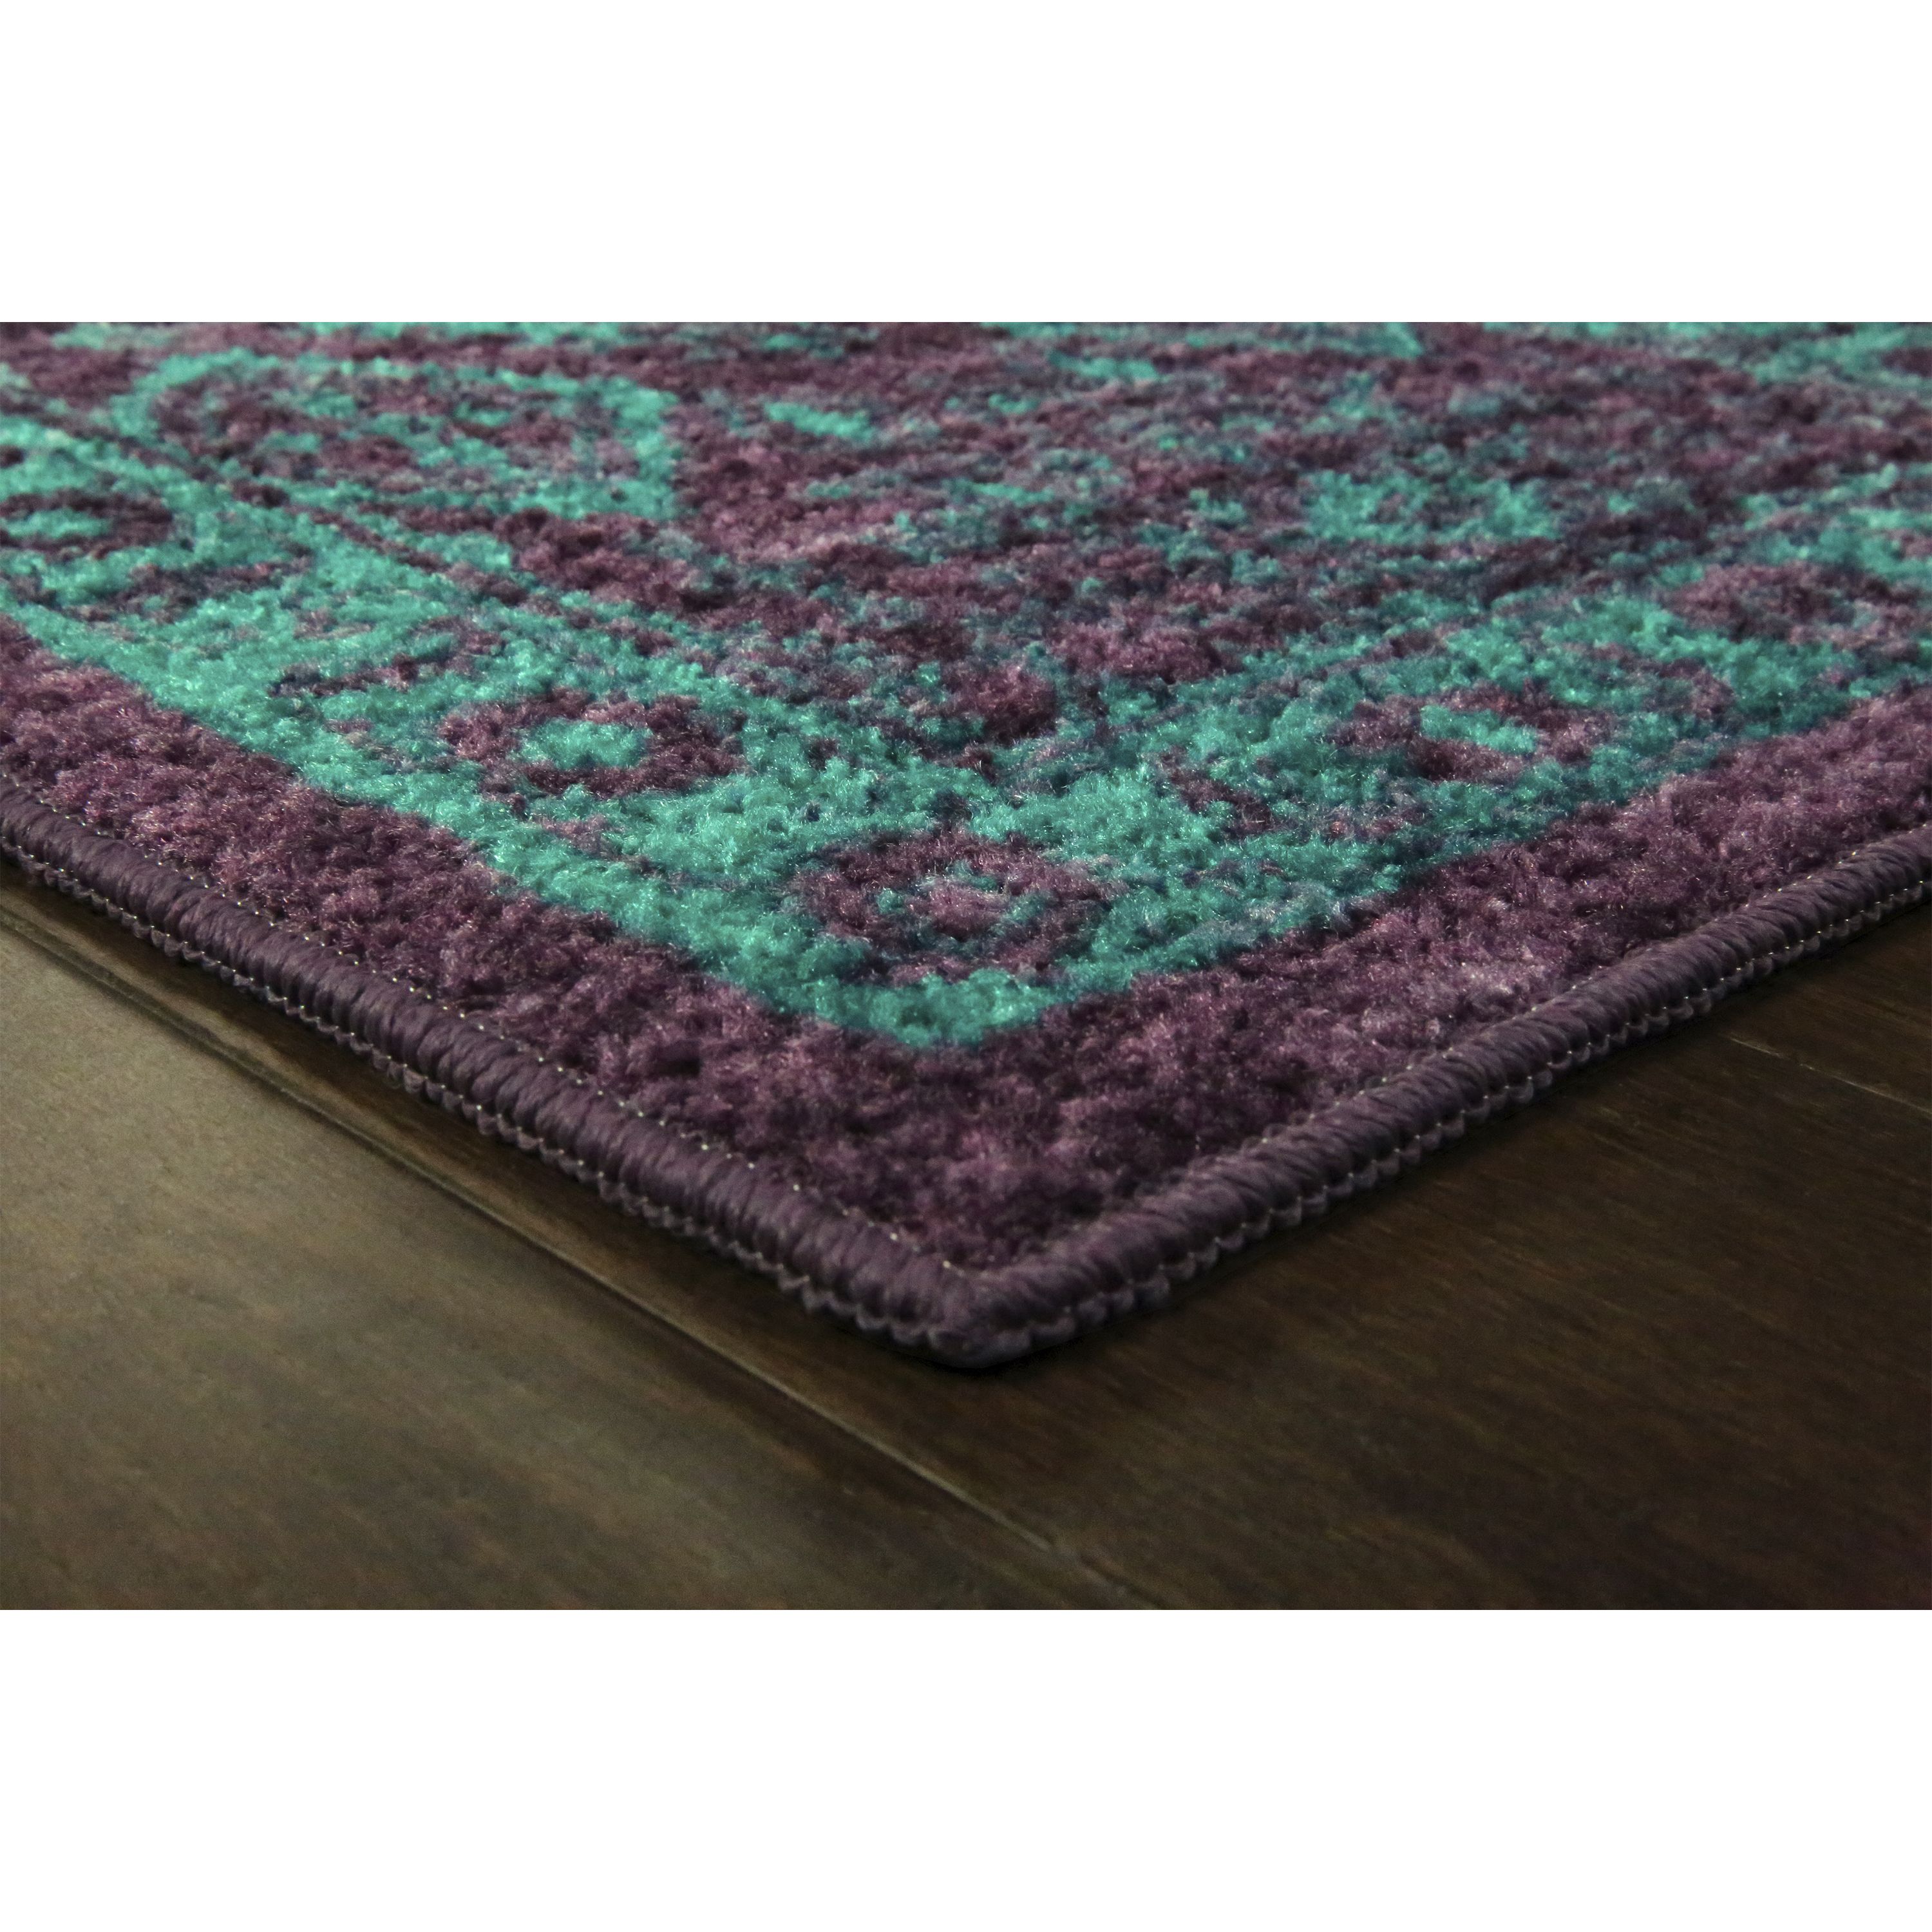 Maples Rugs Global Arya Indoor Entryway Accent Rug, Plum|Spa Green, 1'8"x2'10" - image 5 of 6